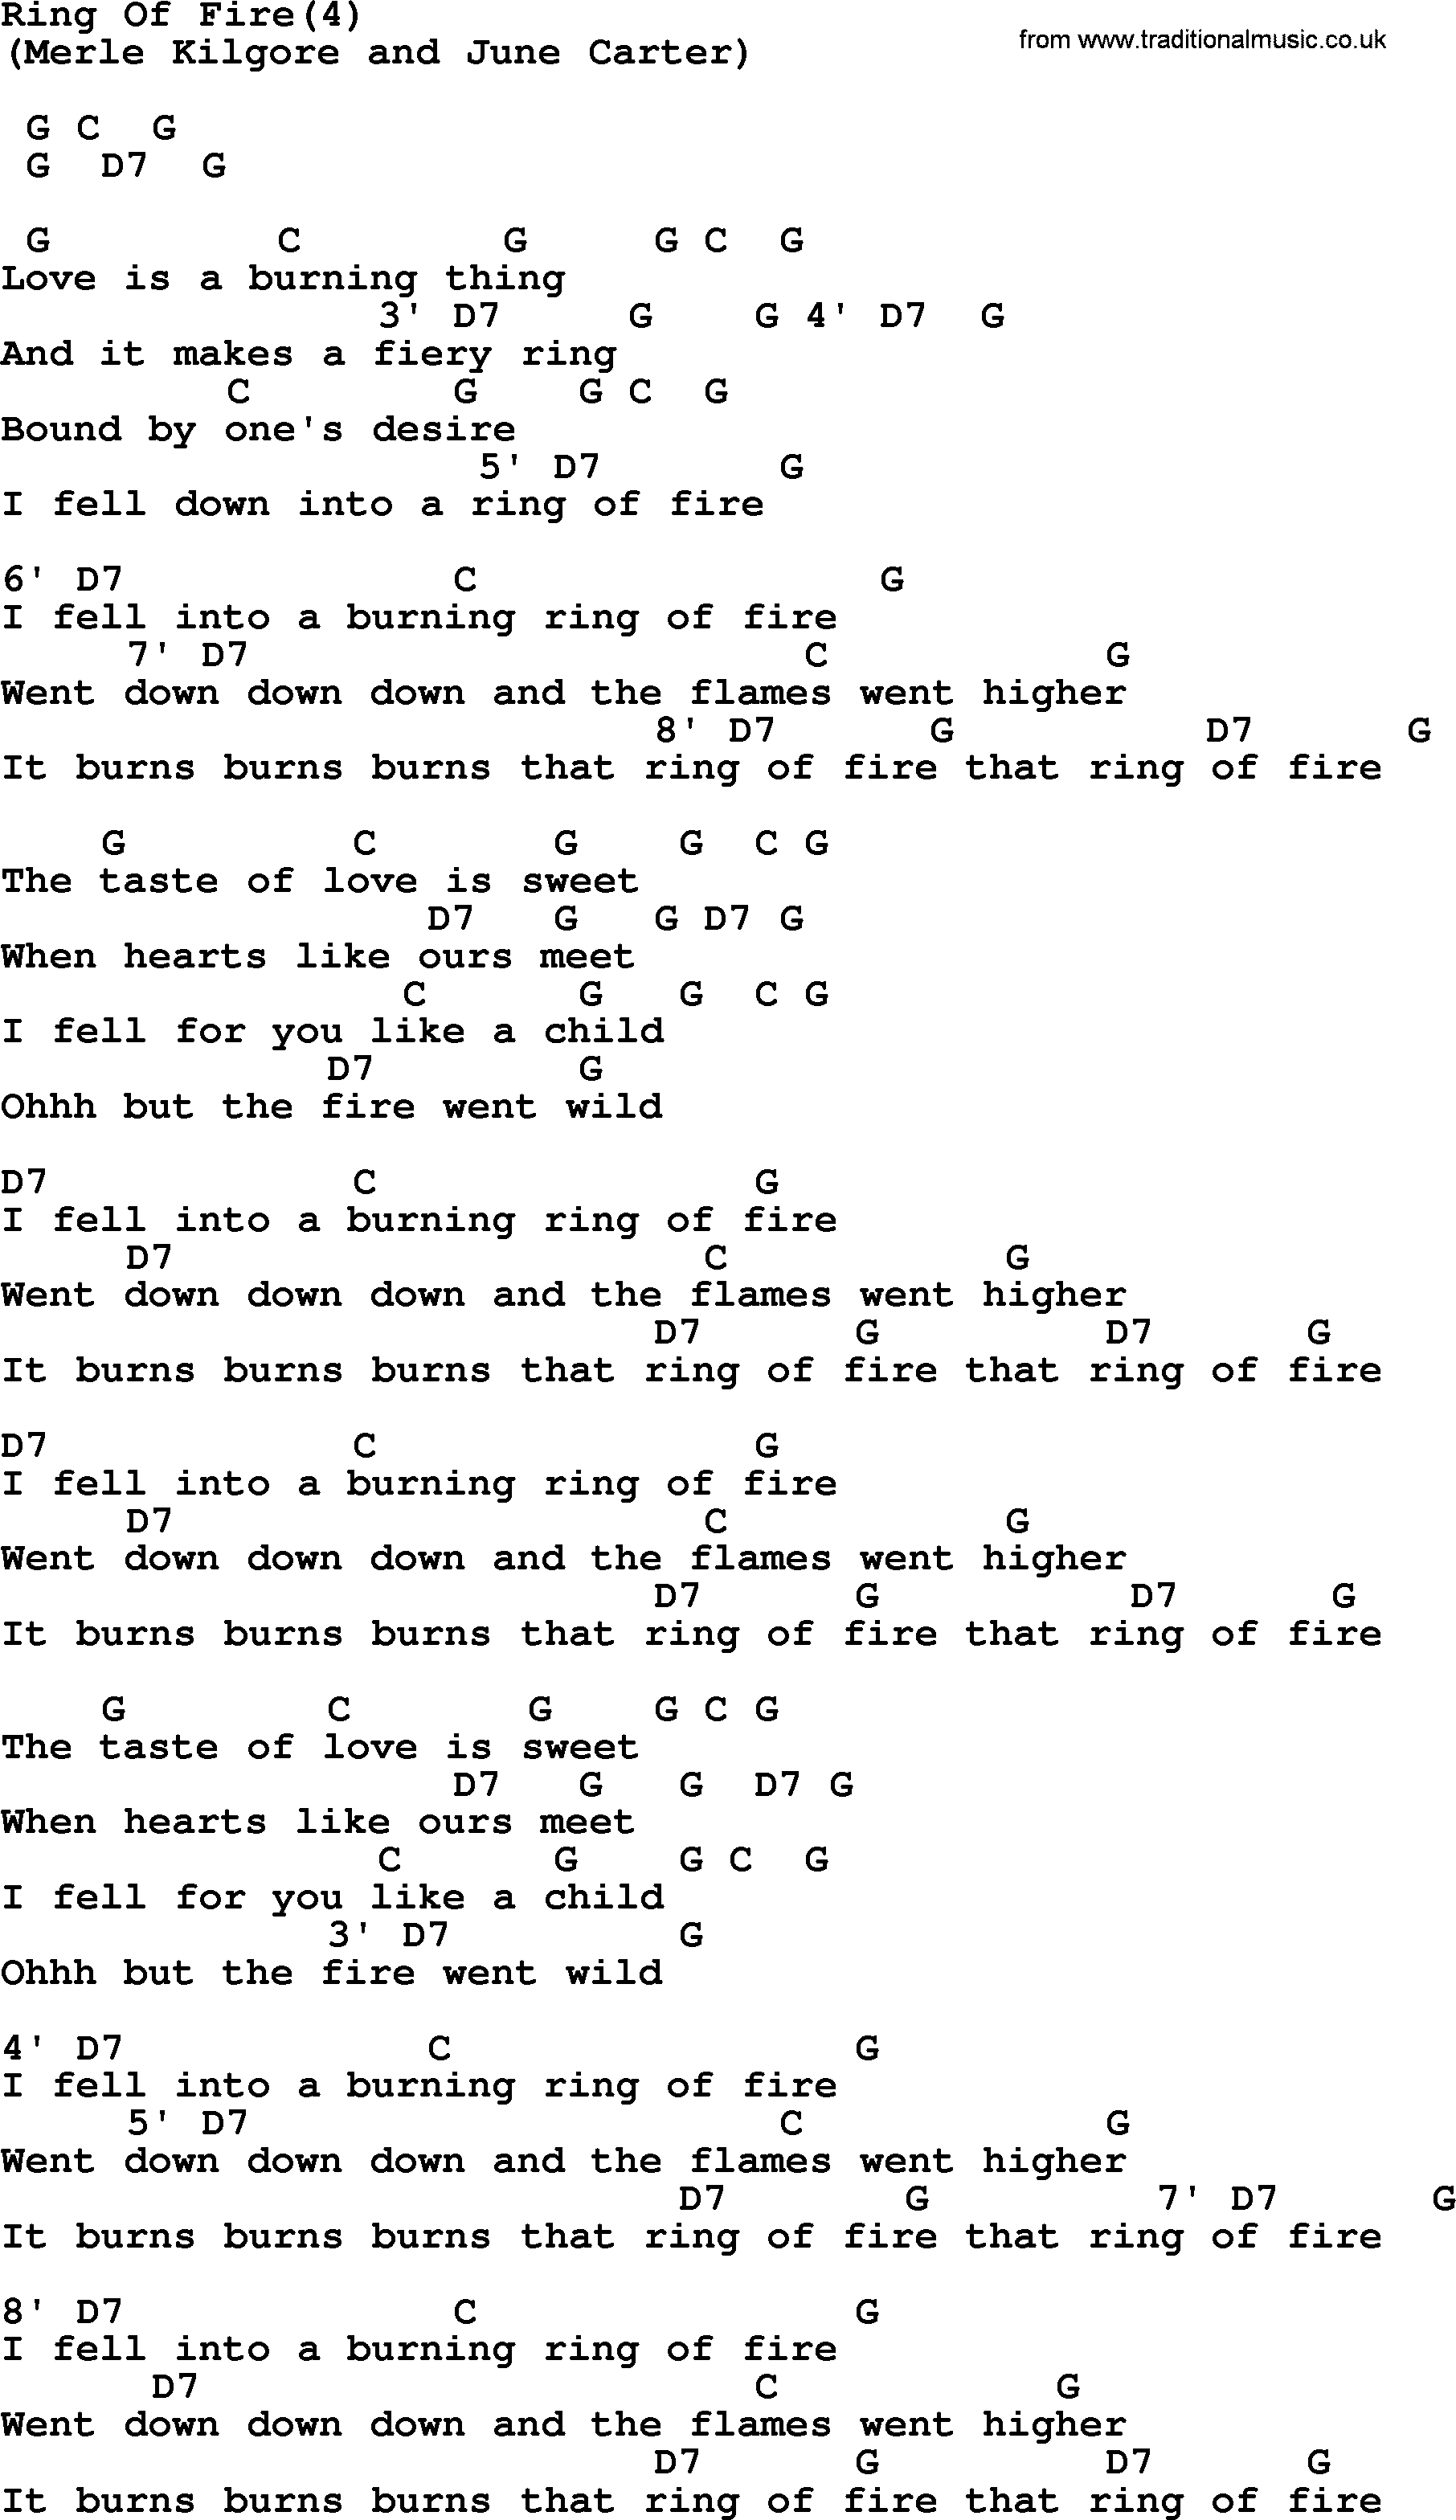 Johnny Cash song Ring Of Fire(4), lyrics and chords